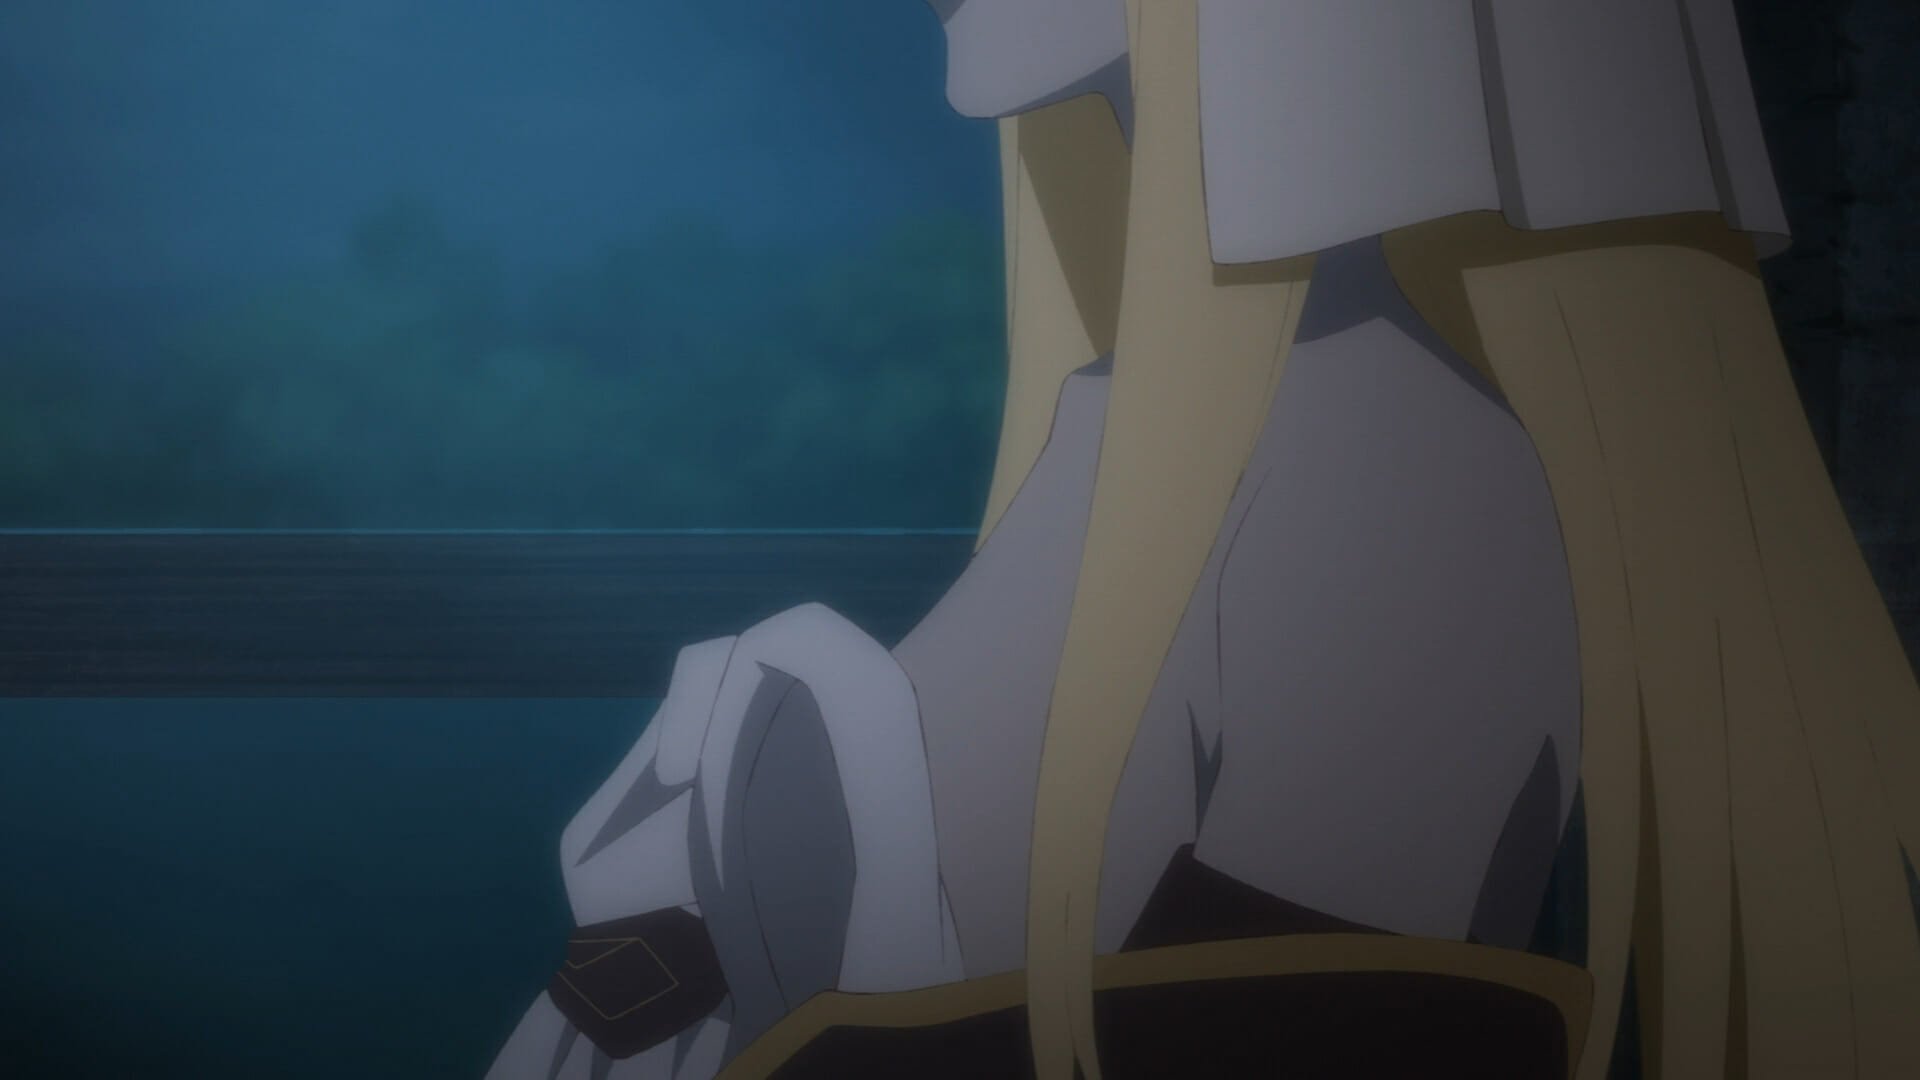 Anime The Faraway Paladin Episode 6: November 13 Release and Plot Speculations Based on Previous Episodes